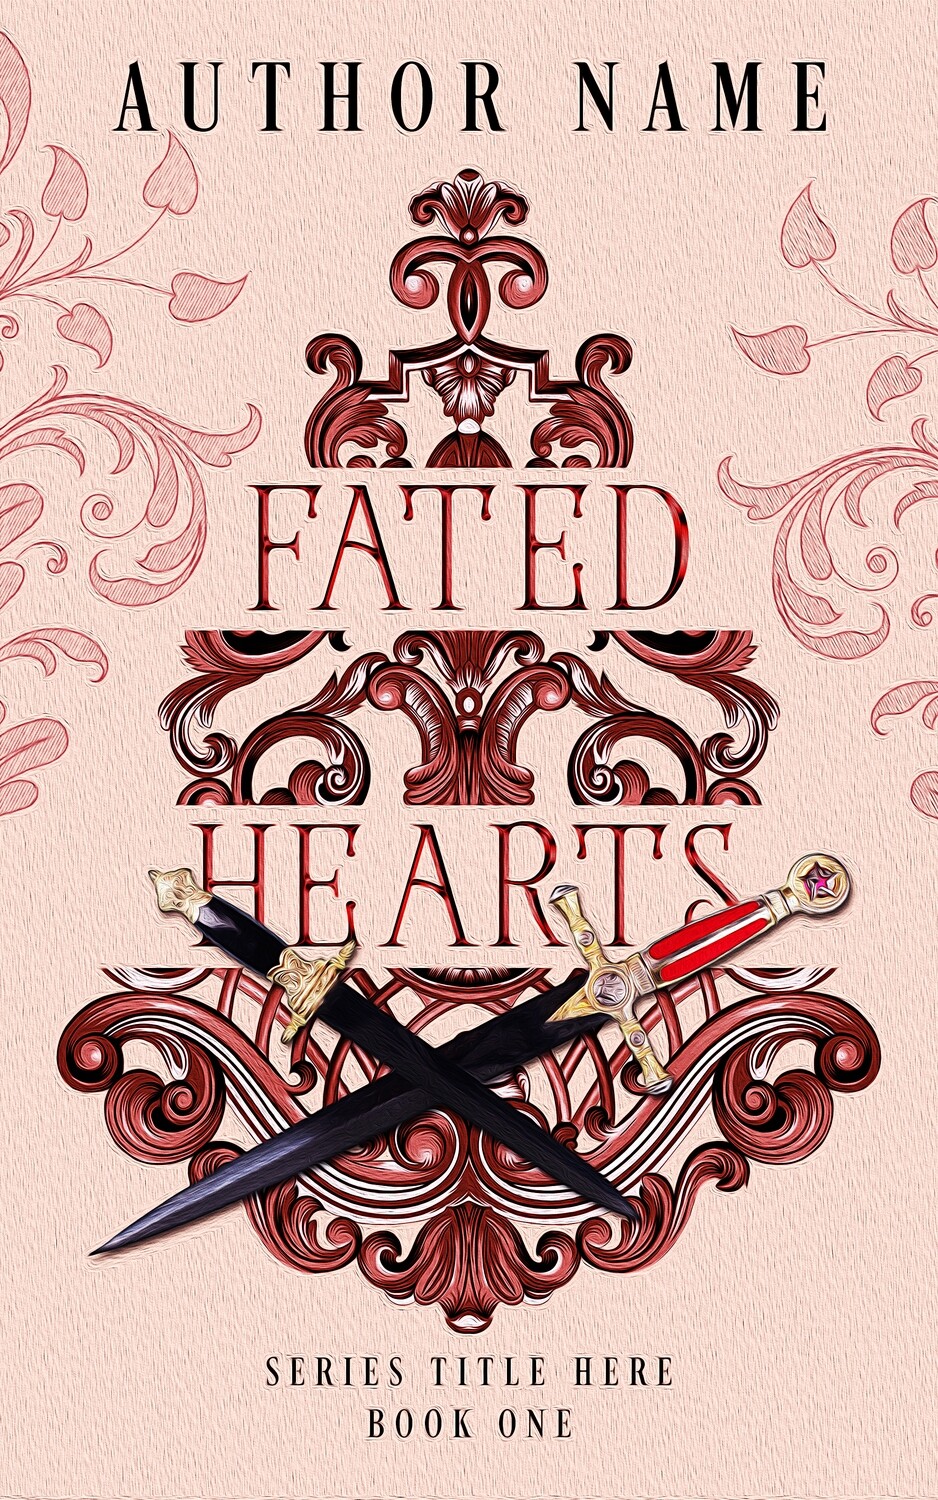 FATED HEARTS